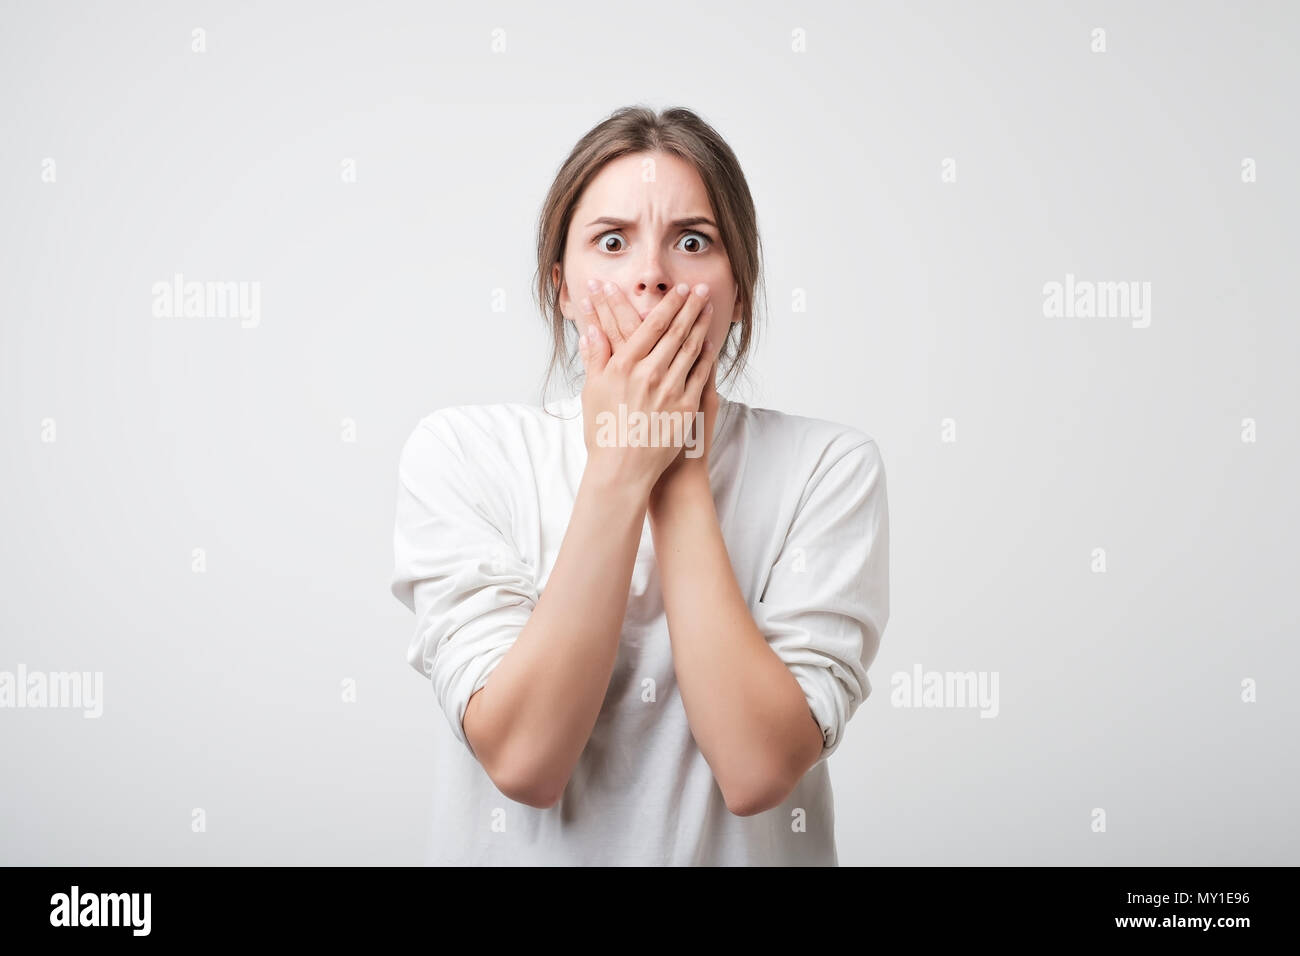 Closeup concerned scared shocked caucasian woman covering her mouth Stock Photo